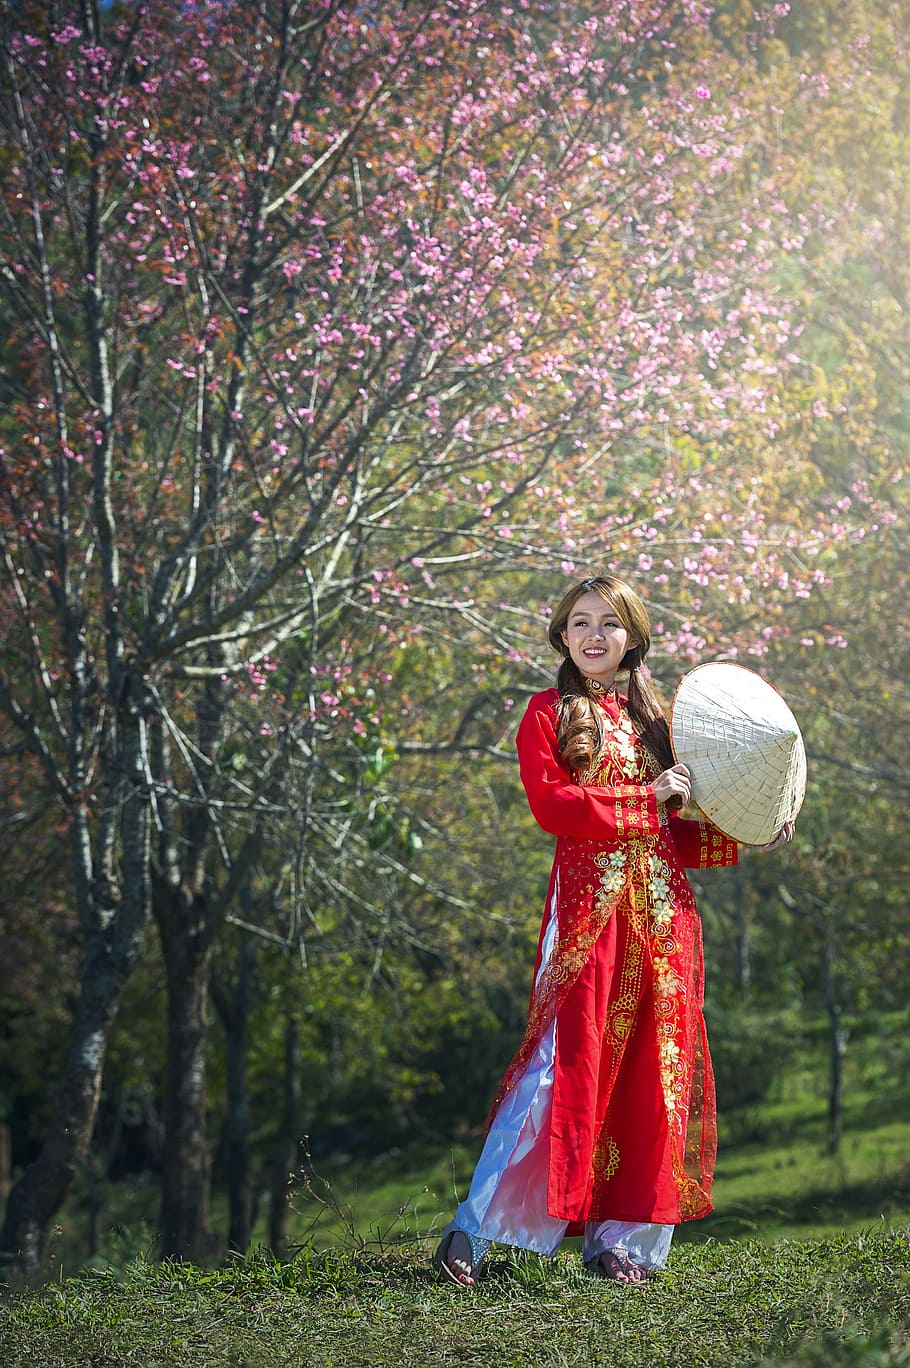 woman, wearing, red, traditional, dress, standing, grass fielkd, action, adult, scared of